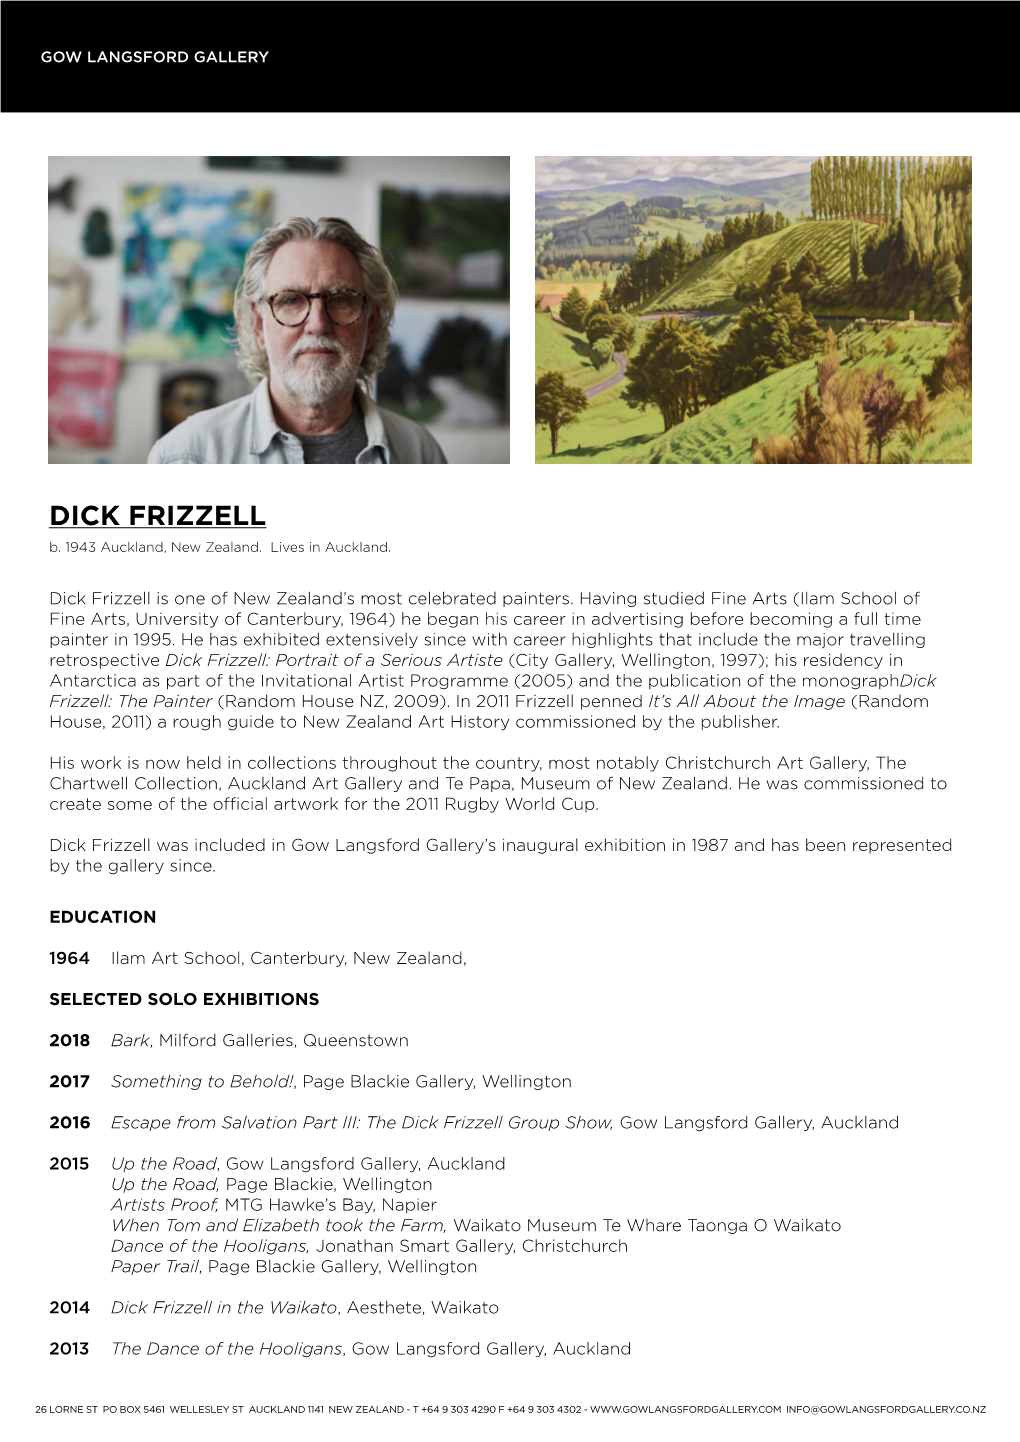 Dick Frizzell